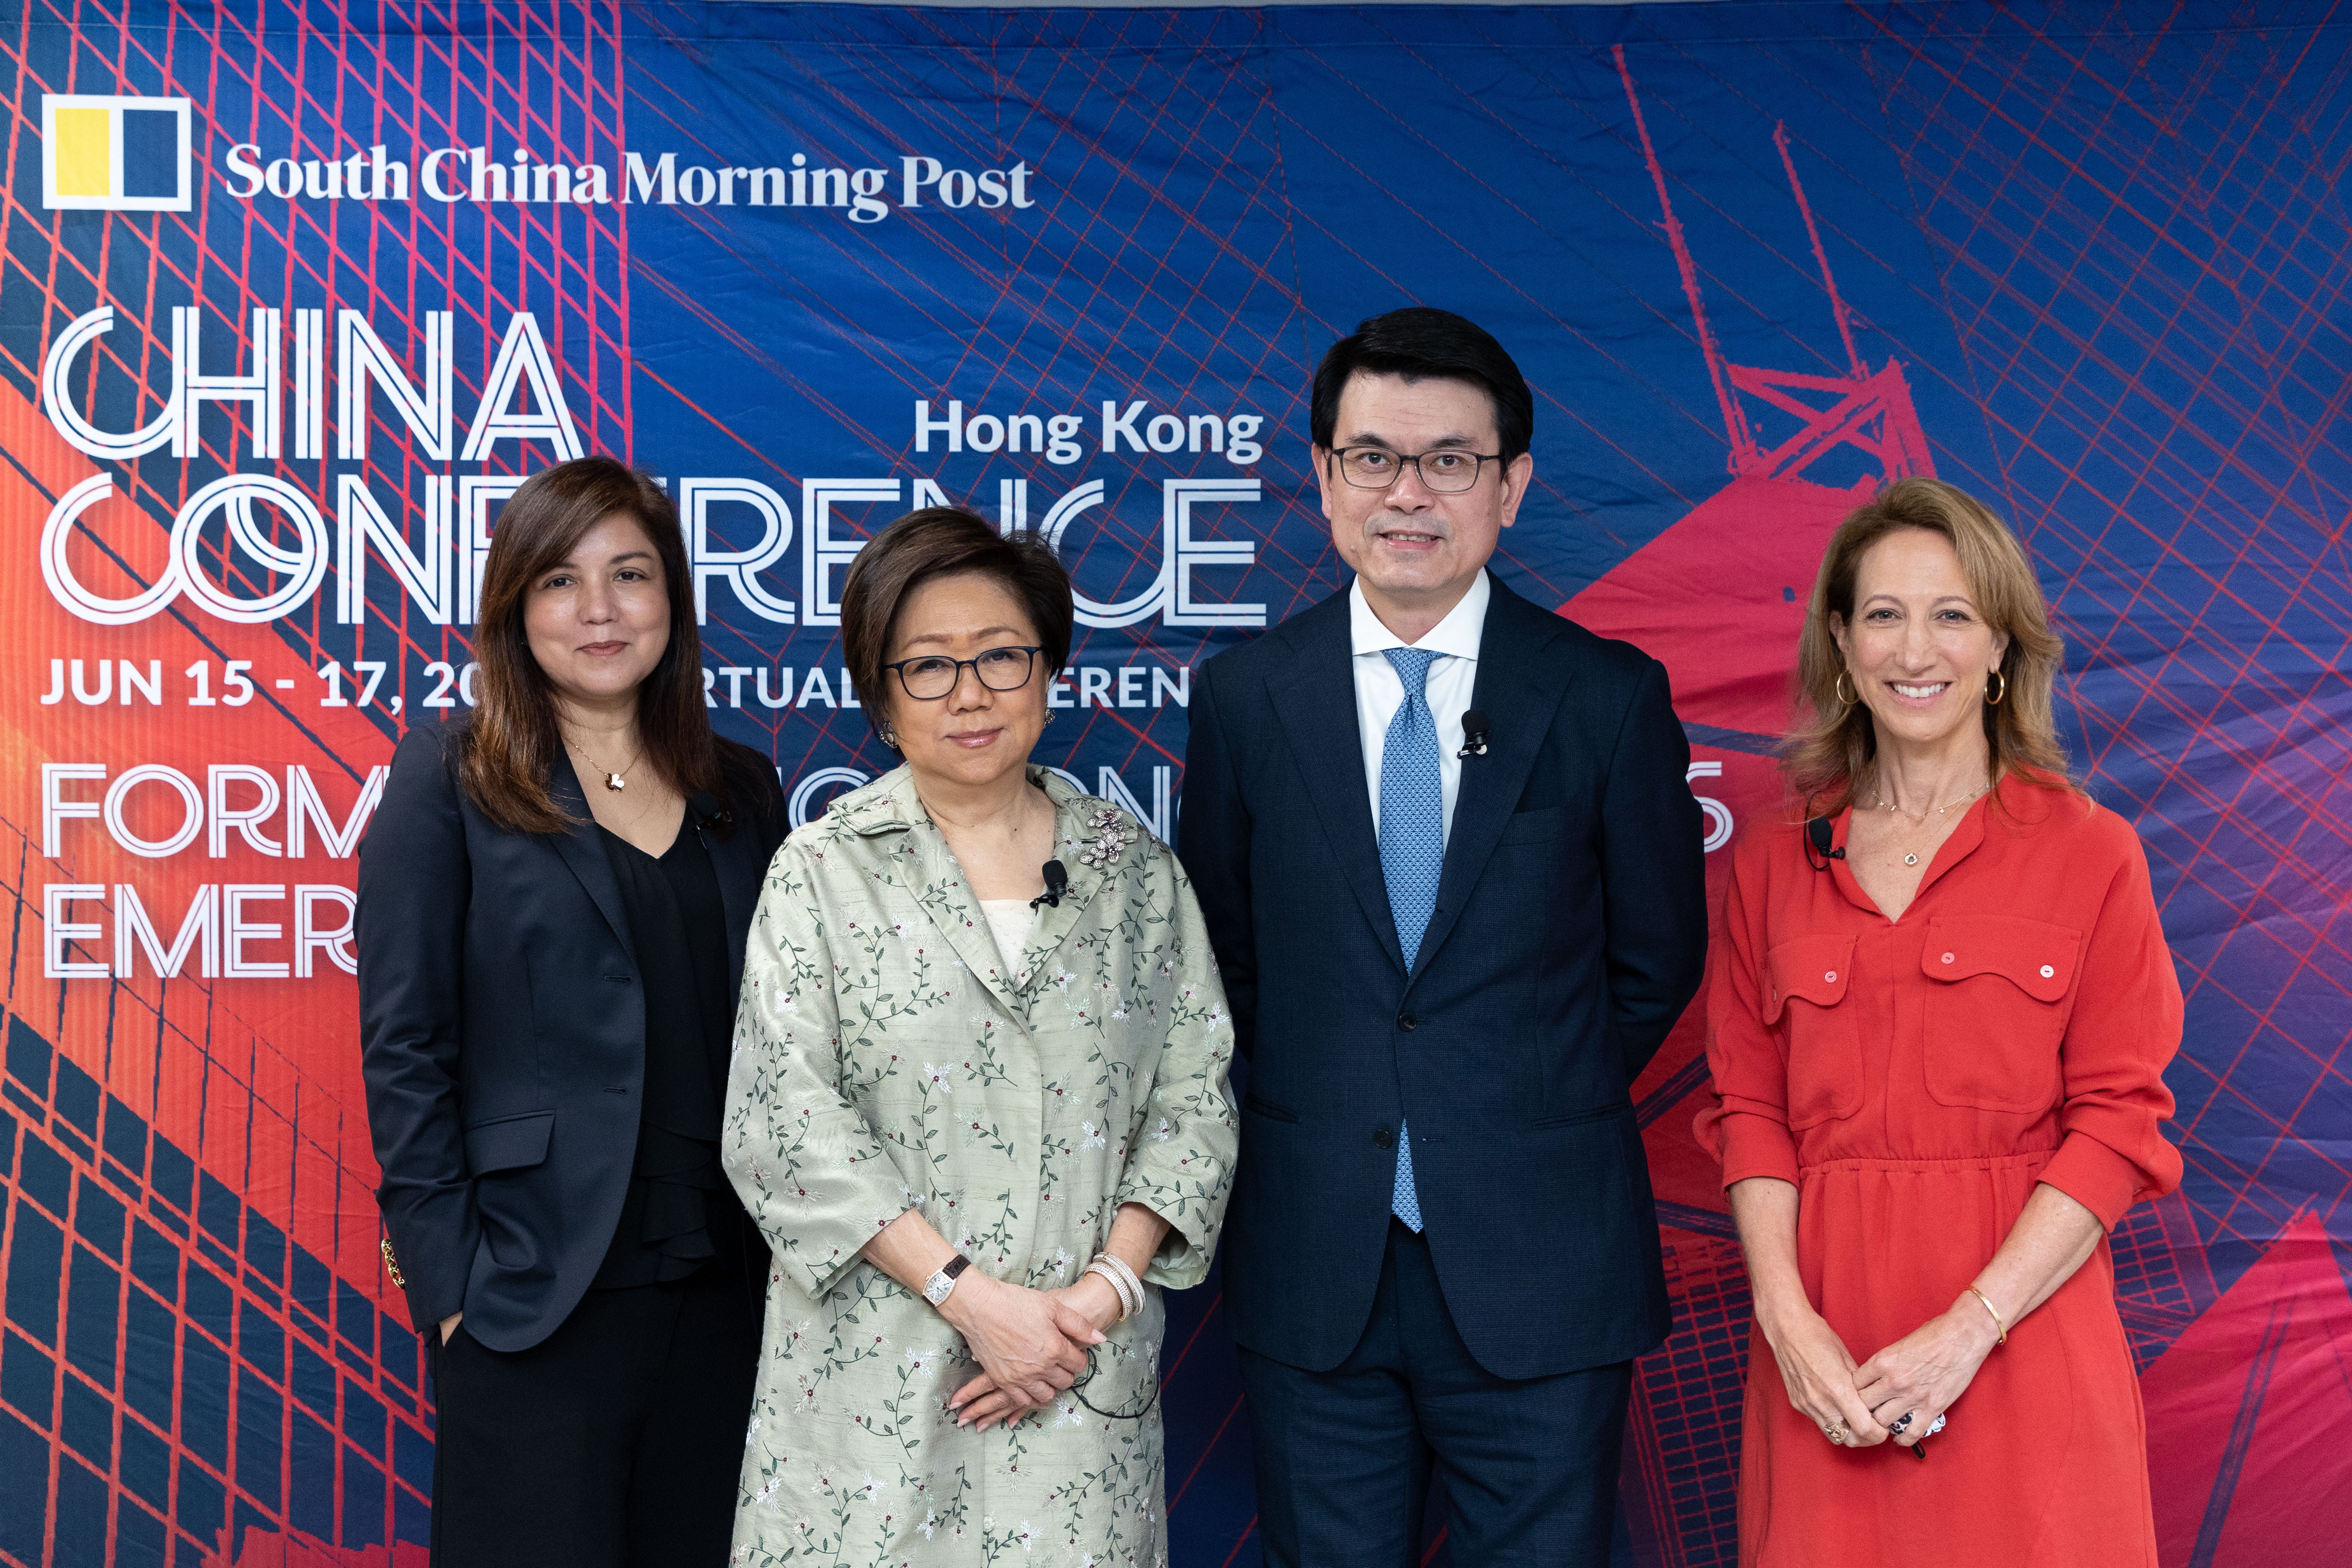 (L-R) (Moderator) Zuraidah Ibrahim, Executive Managing Editor, South China Morning Post; Laura M Cha, GBM, GBS, JP, Chairman, Hong Kong Exchanges and Clearing Ltd; The Hon. Edward Yau Tang-wah, GBS, JP, Secretary for Commerce and Economic Development, Government of the Hong Kong Special Administrative Region; and Tara Joseph, President, American Chamber of Commerce in Hong Kong